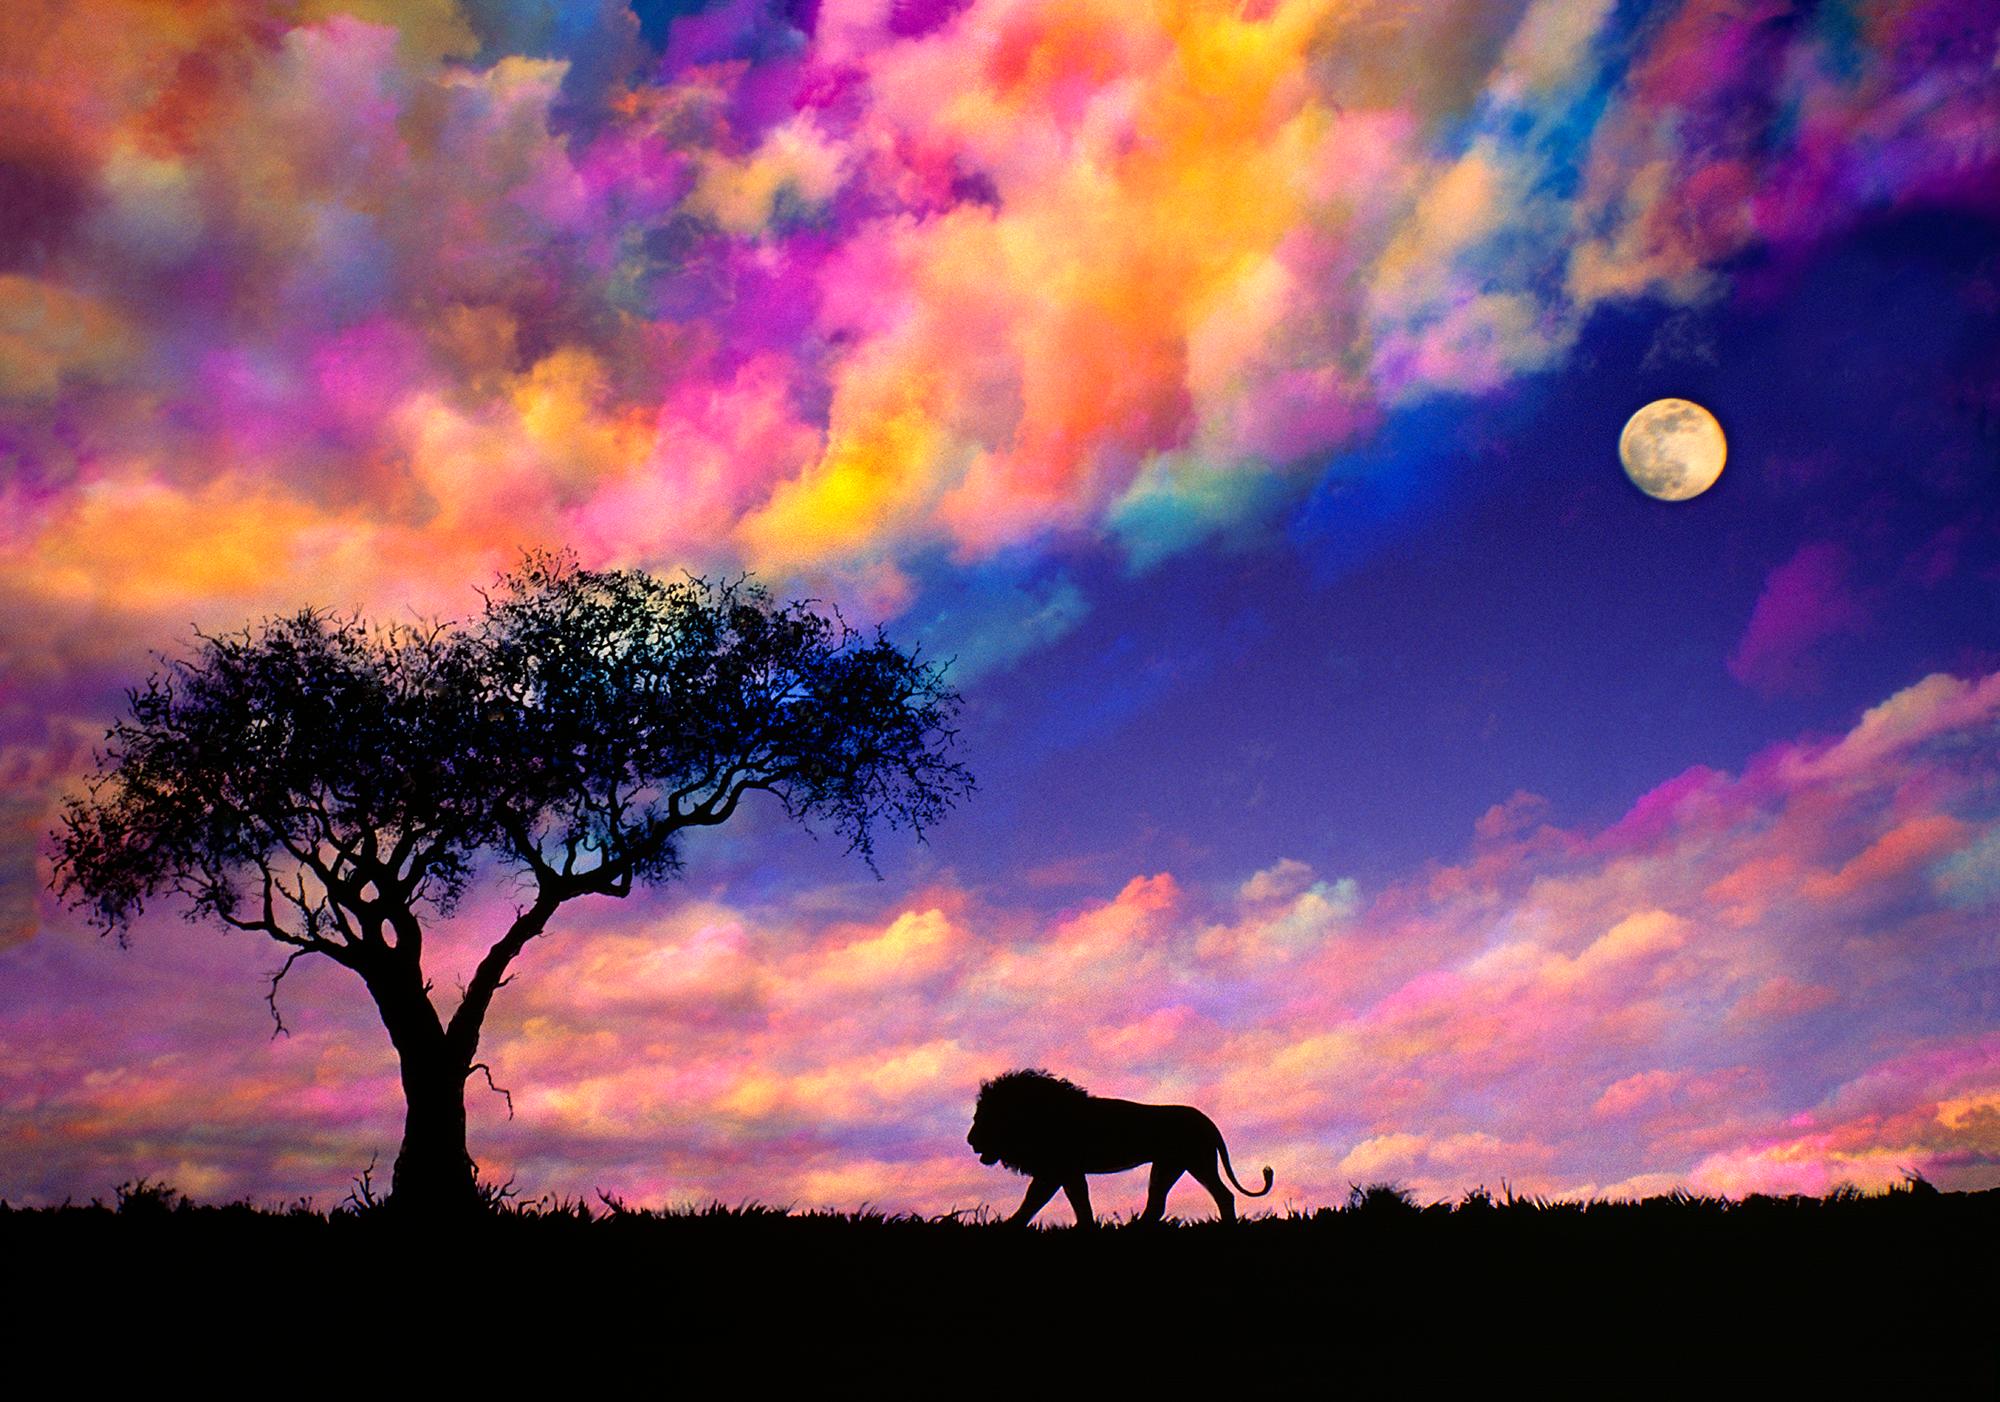 Mitchell Funk Landscape Photograph - Silhouetted Lion on the planes of Africa at Sunset